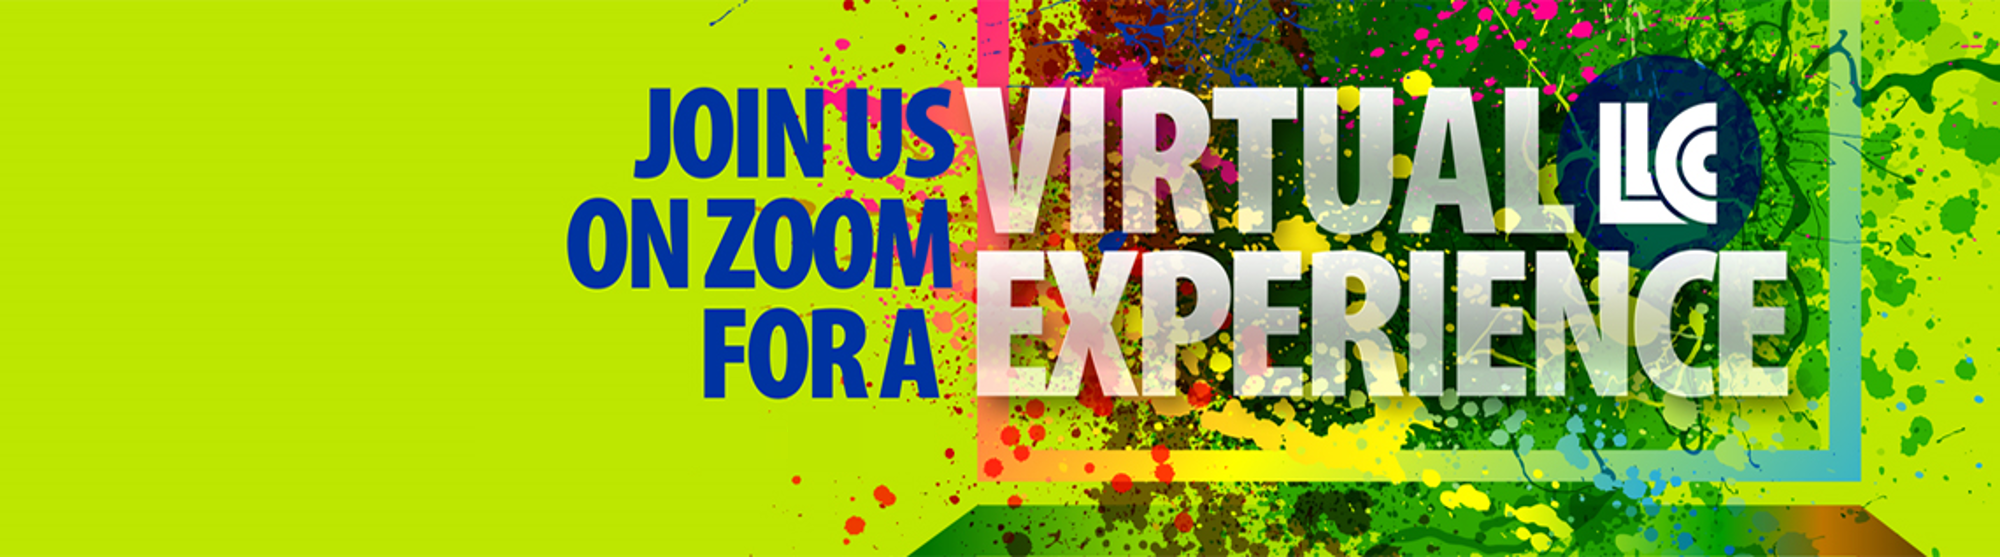 Join us on Zoom for a Virtual LLCC Experience